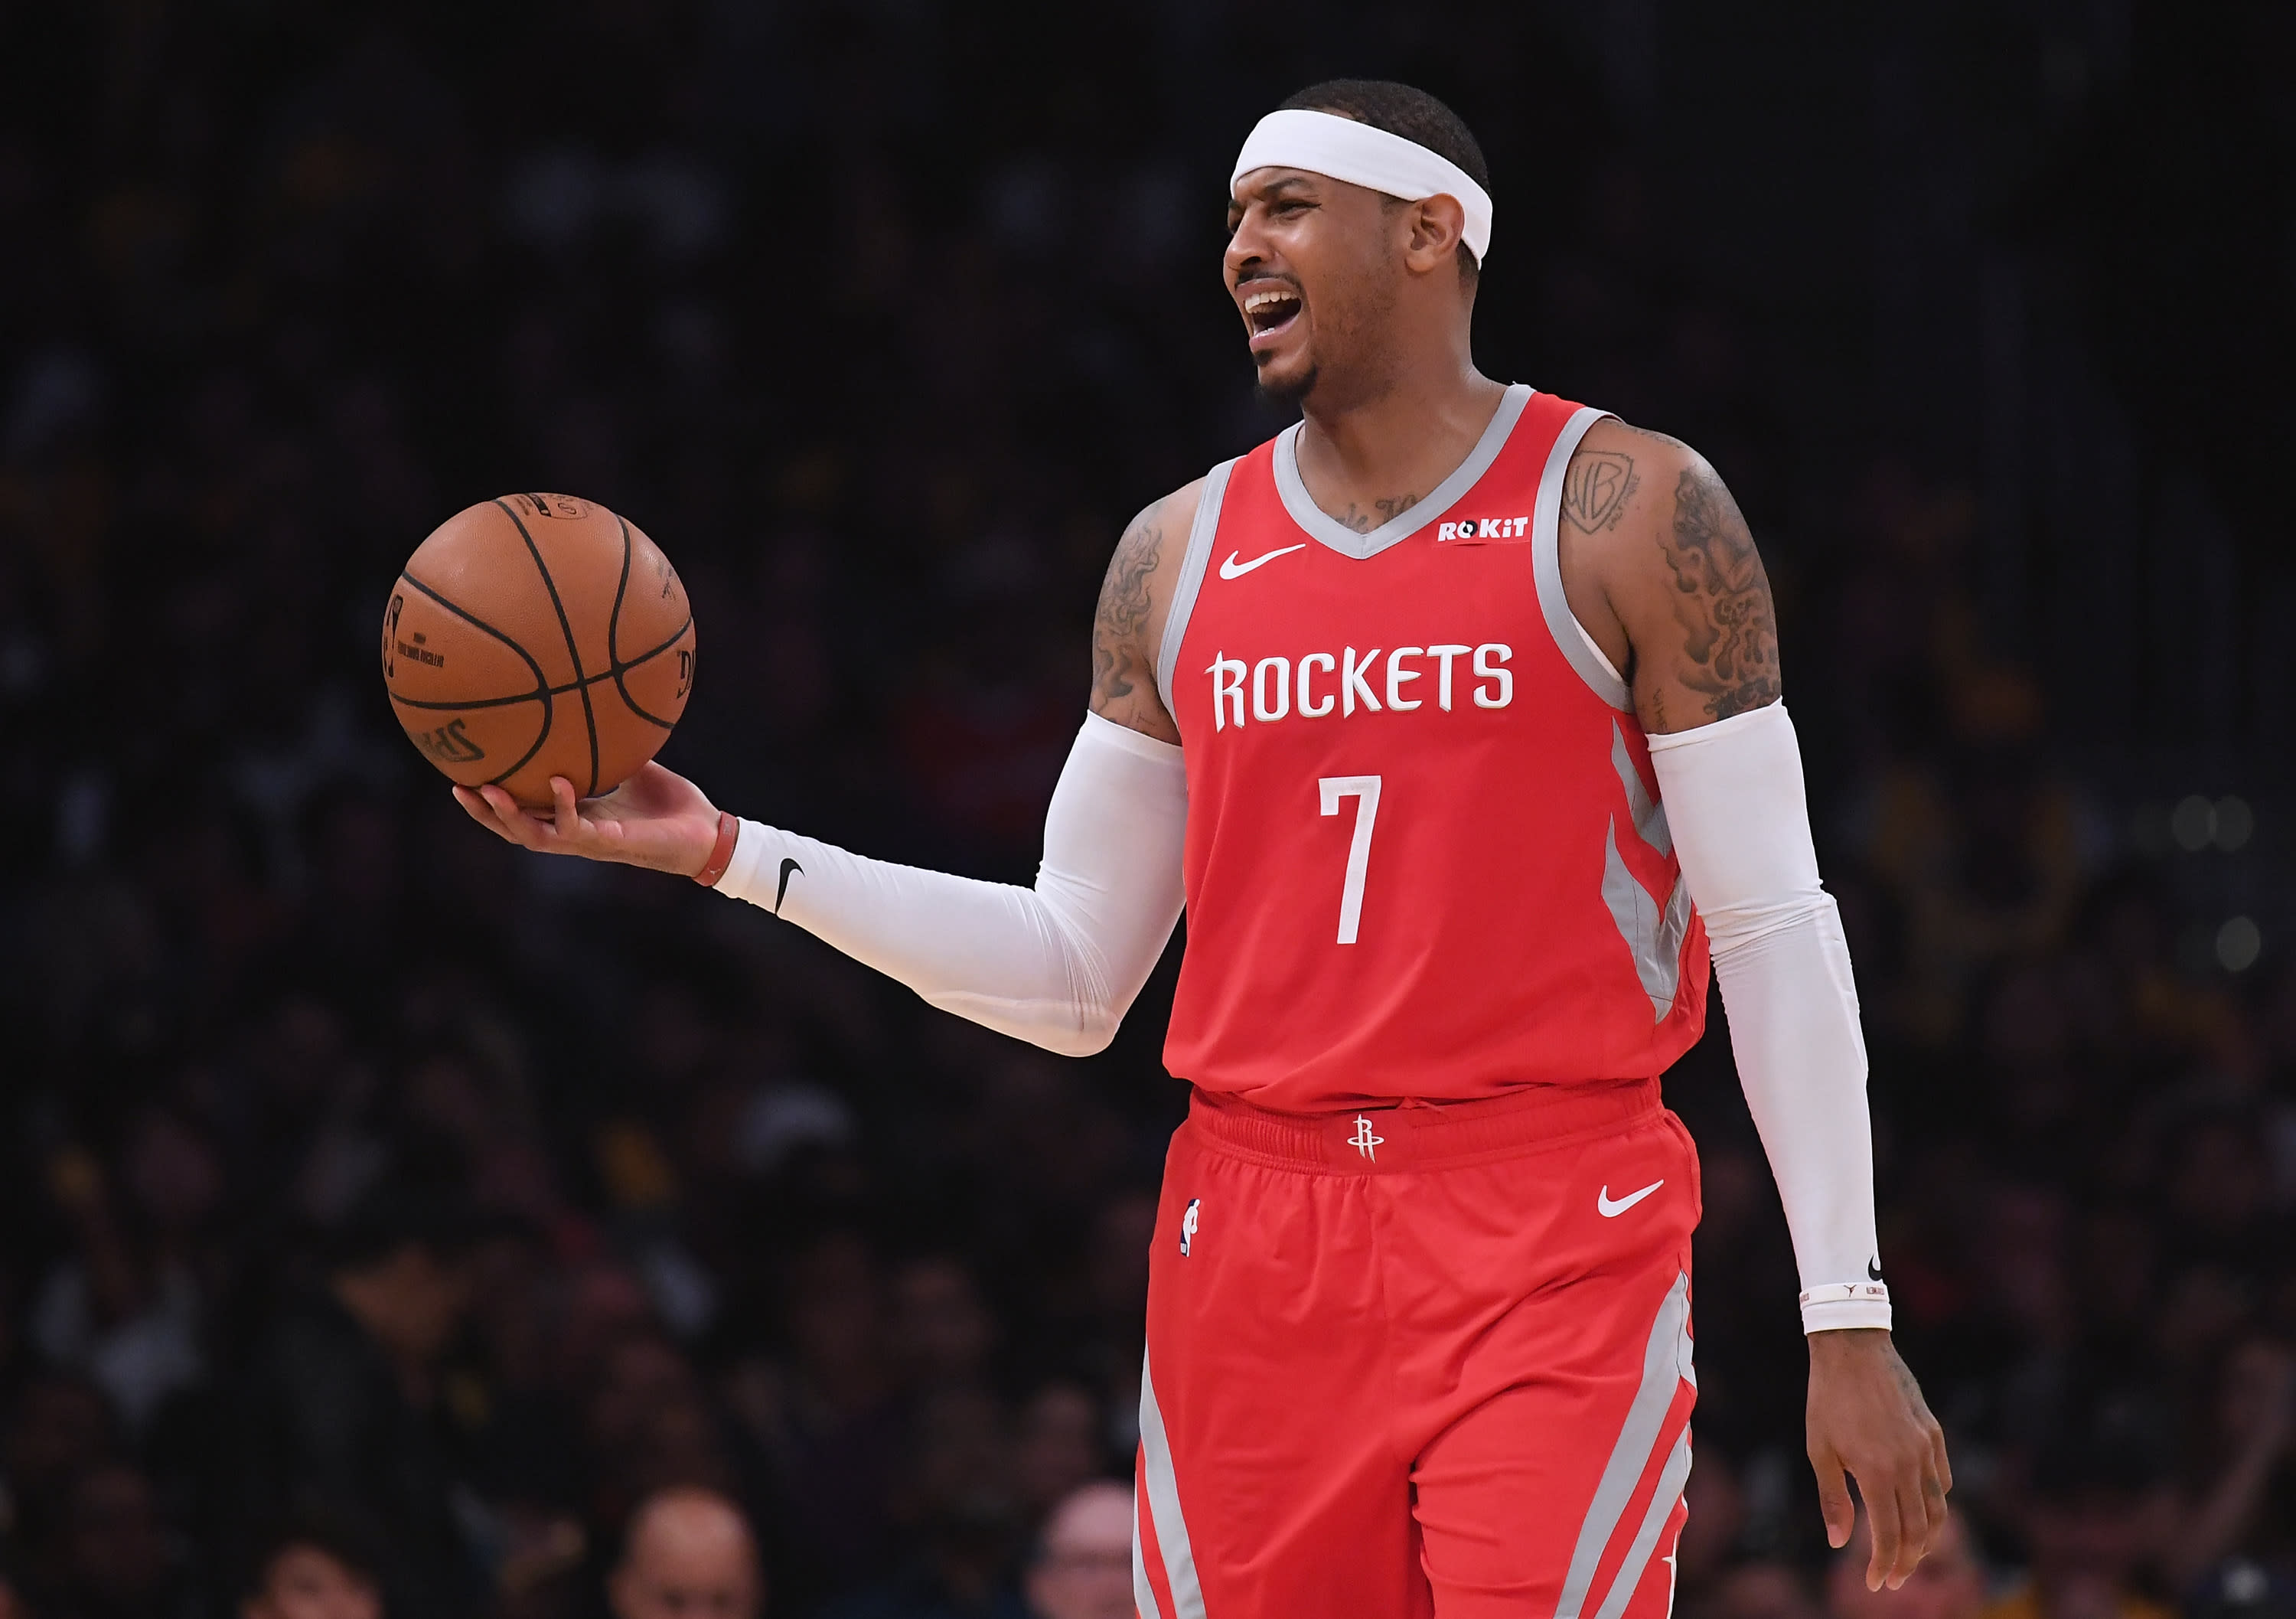 Carmelo Anthony on his Rockets exit: 'I 